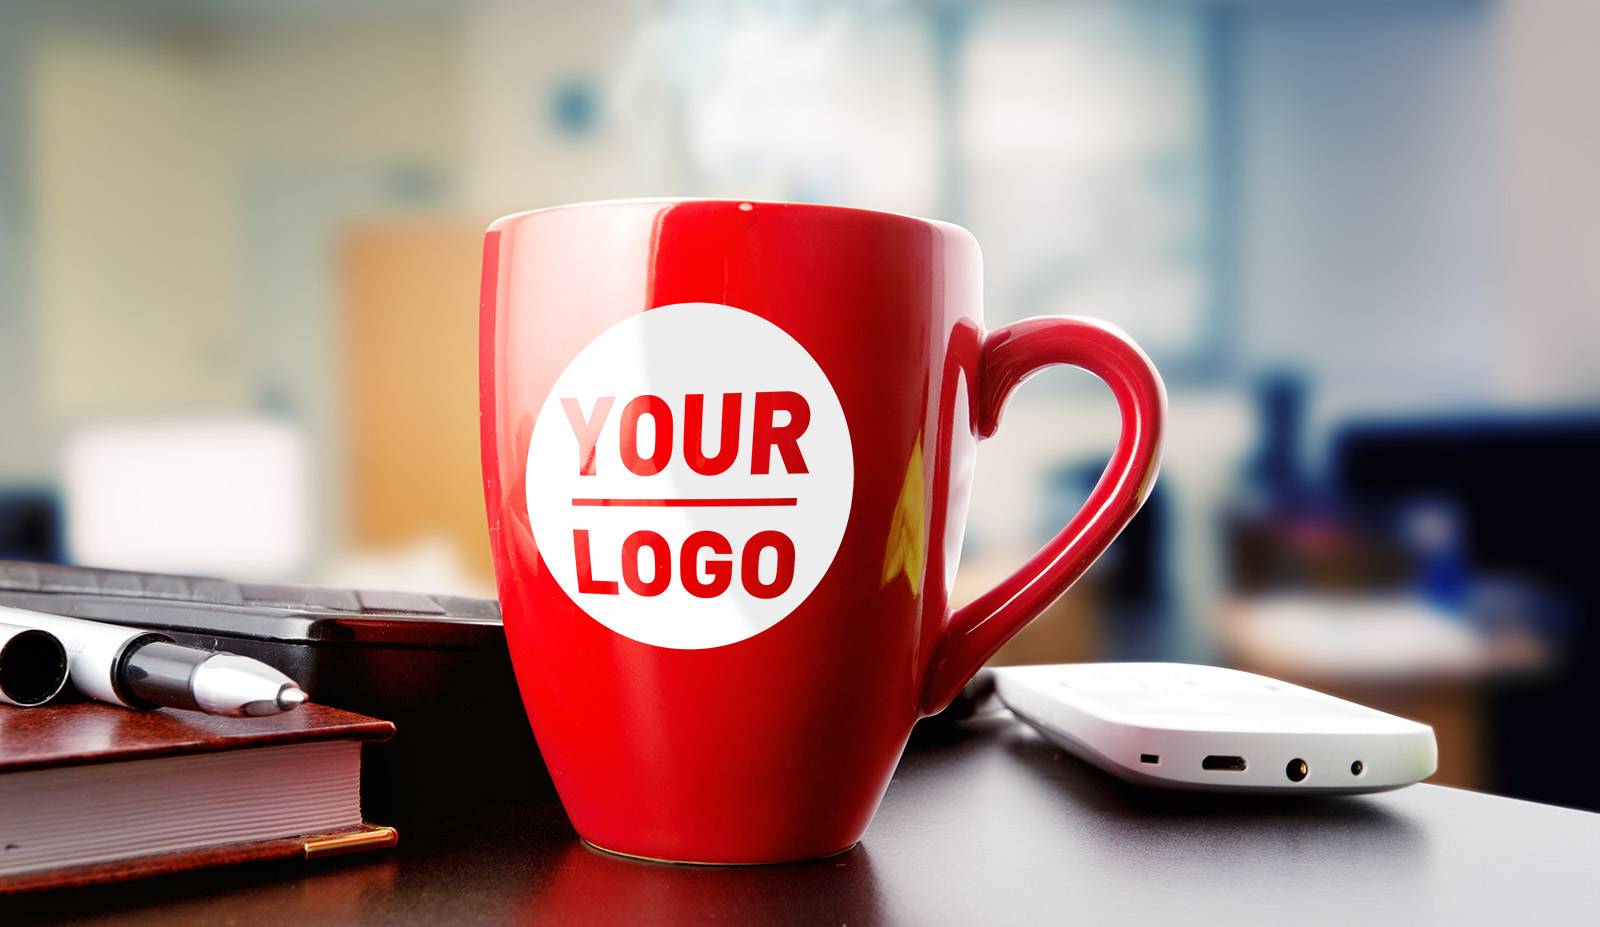 Where Will Your Promotional Product End Up